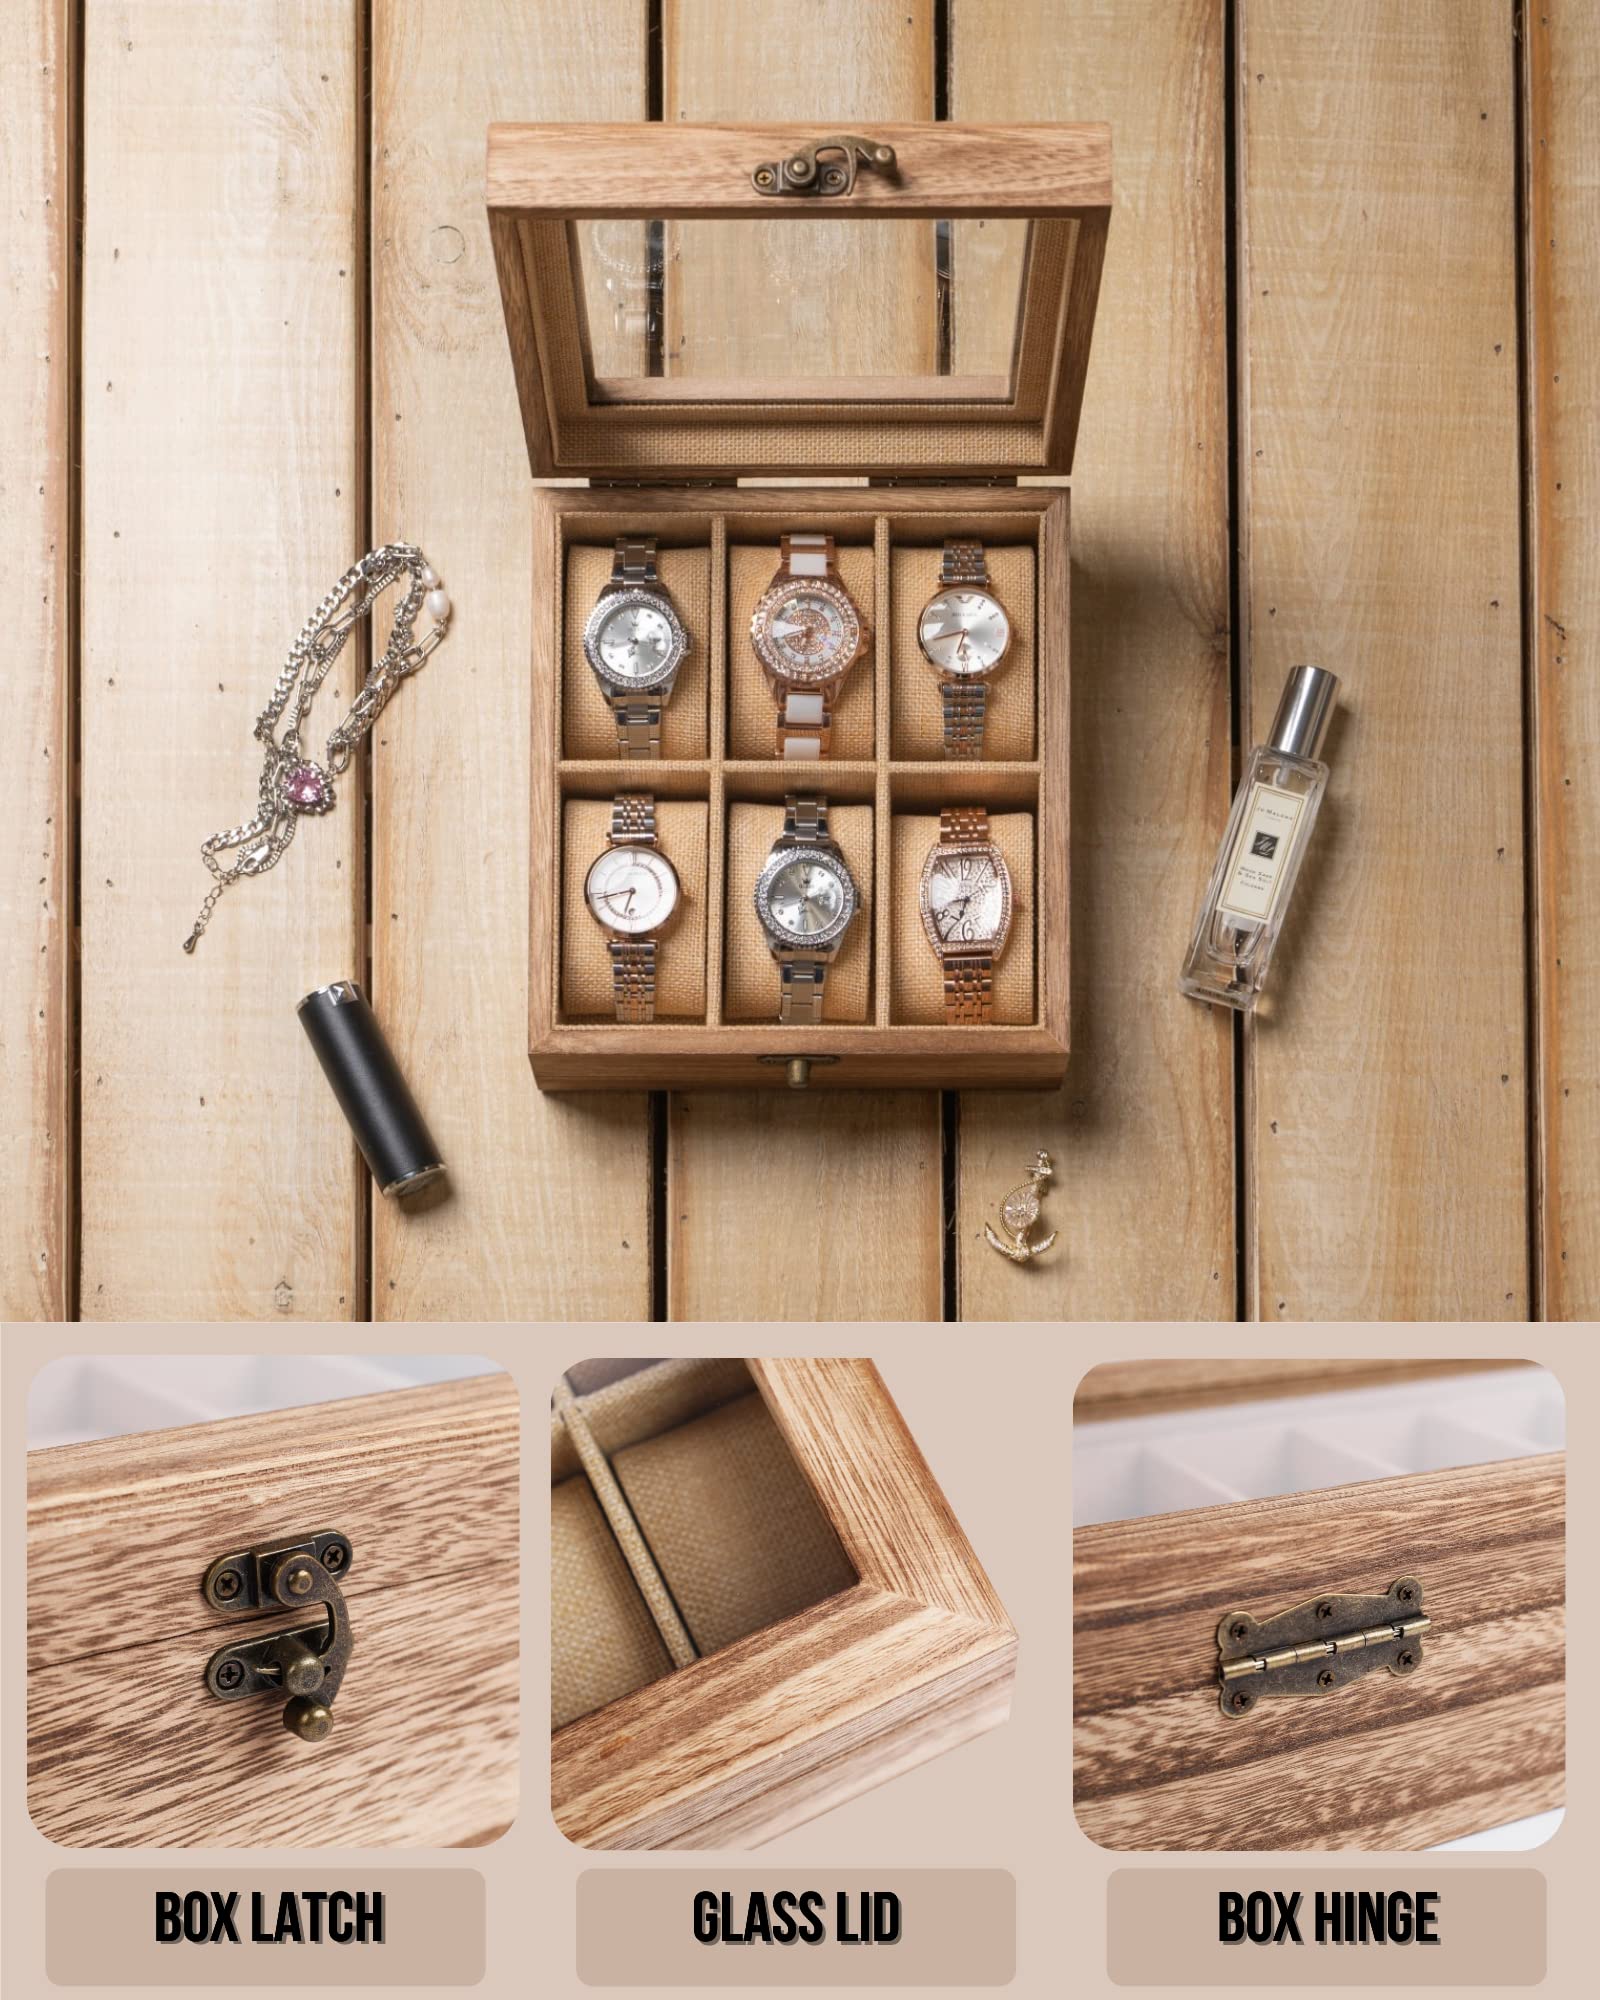 Exper City Watch Box, Watch Case for Men Women with Large Glass Lid, Wooden Watch Display Storage Box with 6 - Slots, Wood Mens Watch Box Organizer